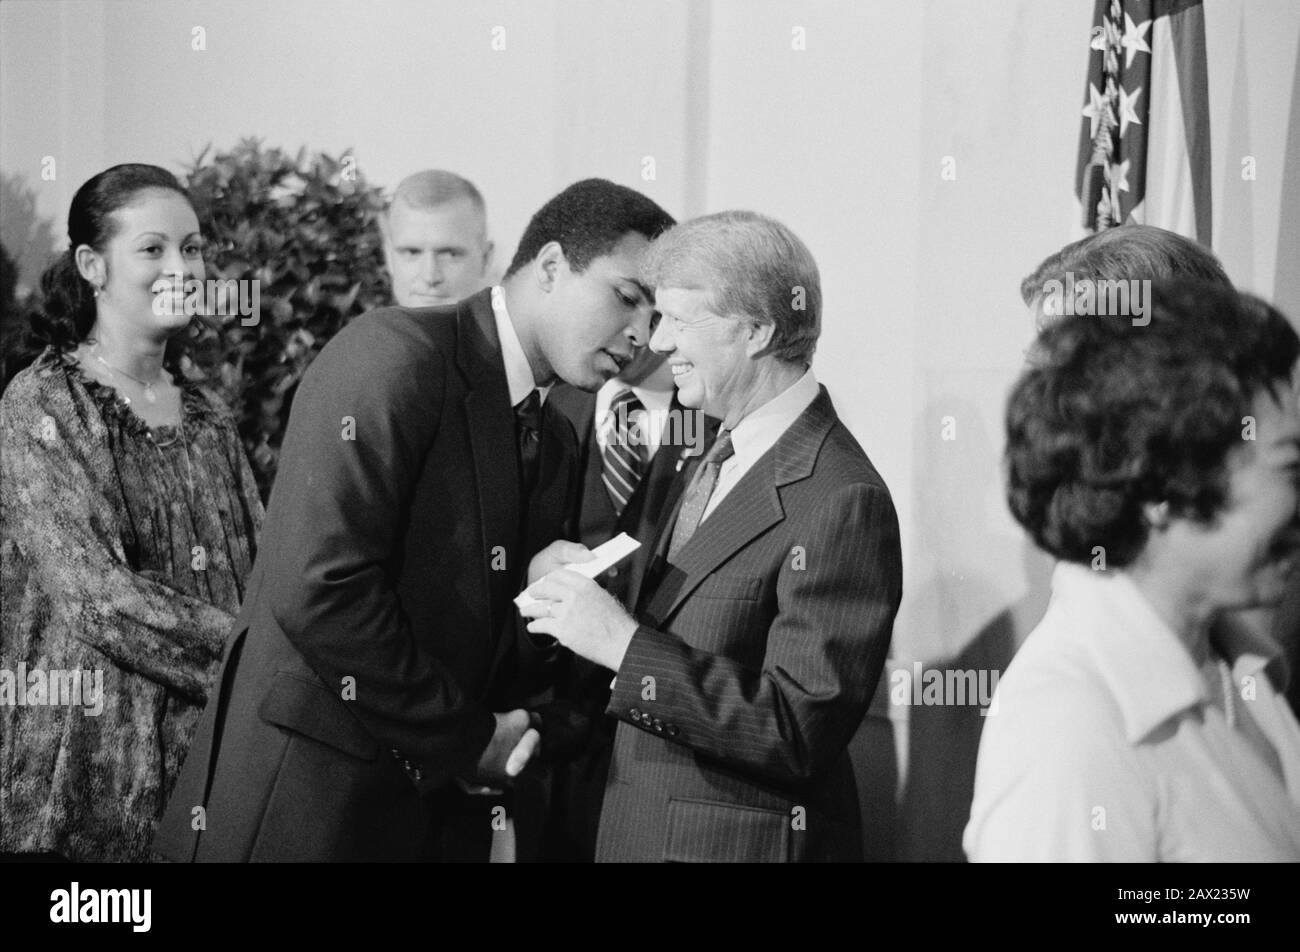 1977 , 7 september , Washington DC , USA  : The President of USA  Jimmy Carter  ( born in 1924 ) greets the boxeur Mohammed Ali ( CASSIUS CLAY , born in 1942 ) at a White House dinner celebrating the signing of the Panama Canal Treaty . Photo by Marion S. Trikosko for the US Govern . - SPORT - BOX - POLITICO - POLITICA - POLITICIAN - POLITIC - PRESIDENTE STATI UNITI  - sportivo  - PUGILATO - PUGILE   ----  ARCHIVIO GBB Stock Photo